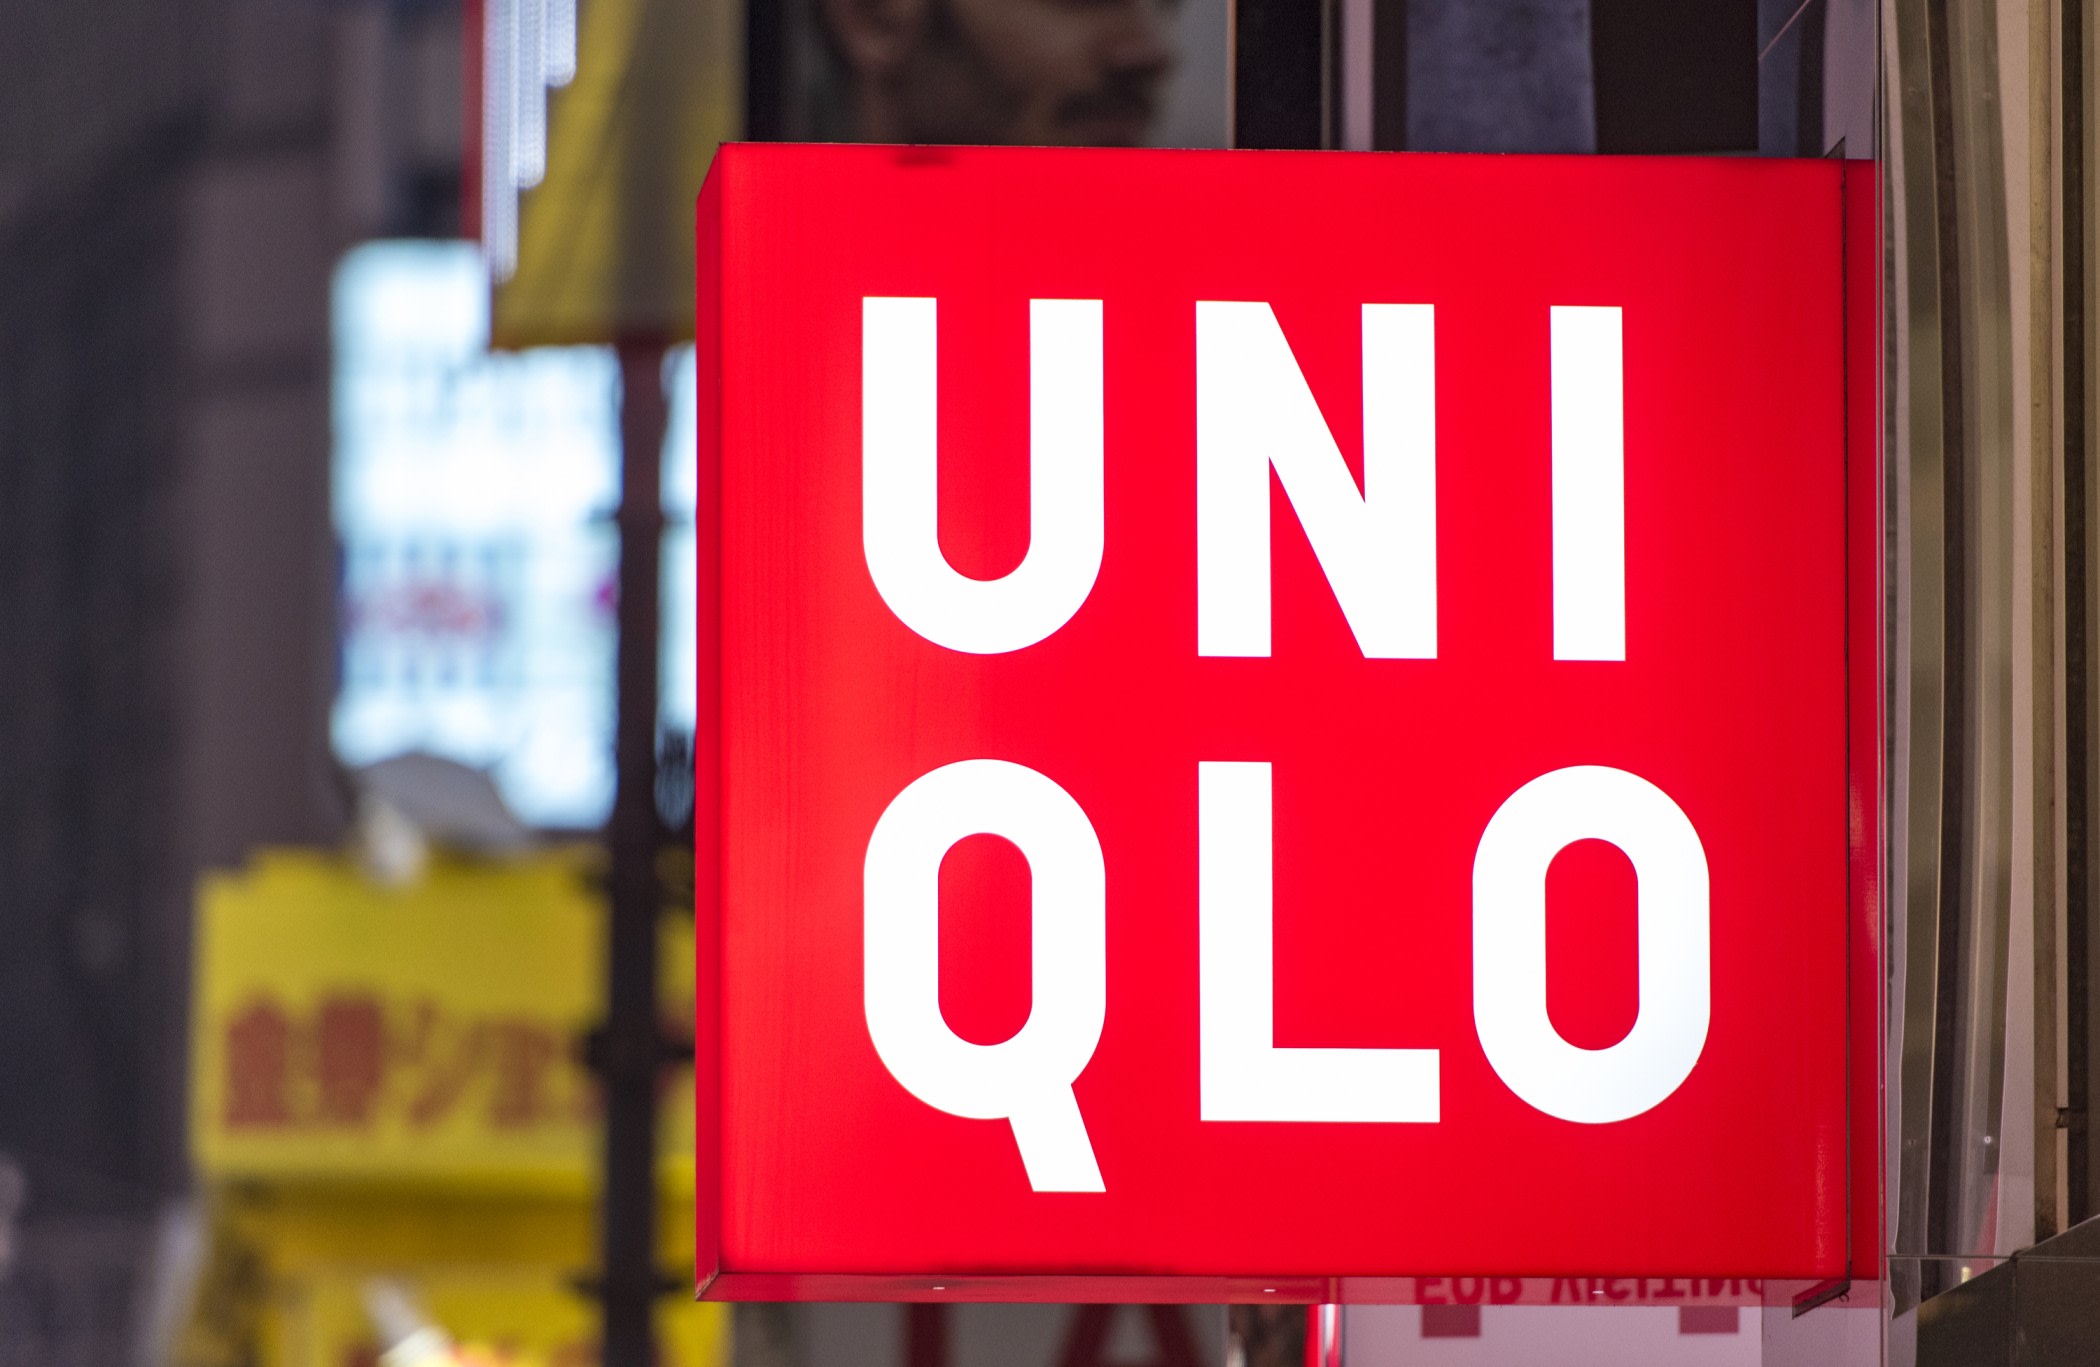 UNIQLO Launches REUNIQLO STUDIO in London Regent Street Store  Helping  customers enjoy LifeWear longer by offering repair remake reuse  recycling and care essentials  FAST RETAILING CO LTD